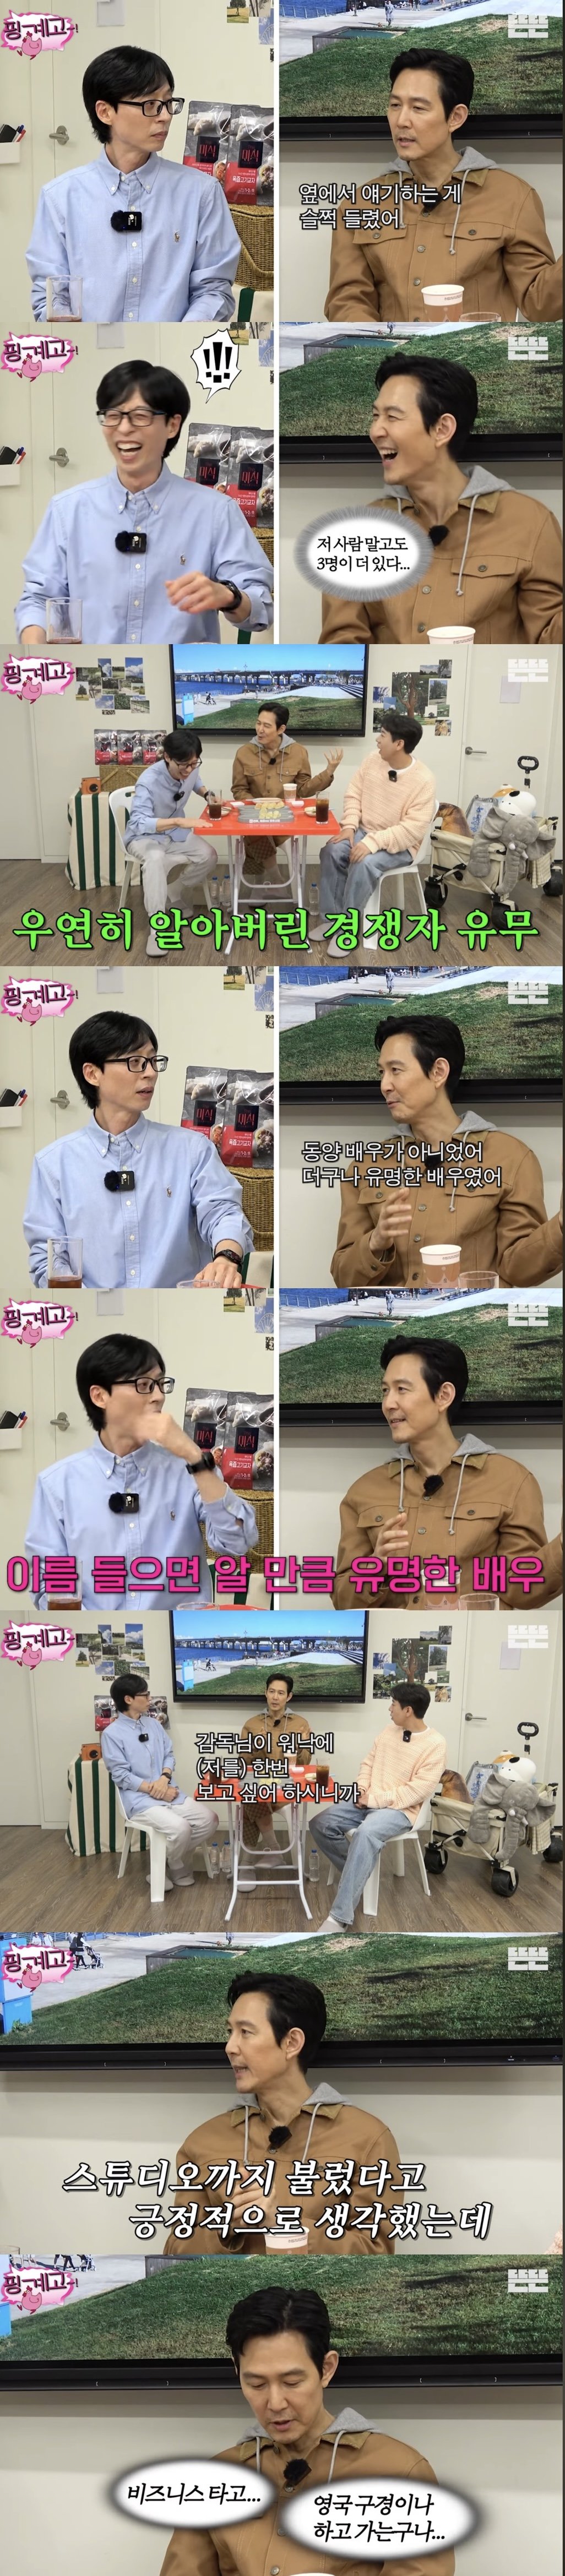 Lee Jeong-jae auditioned for the first time in a while because of Star Wars.